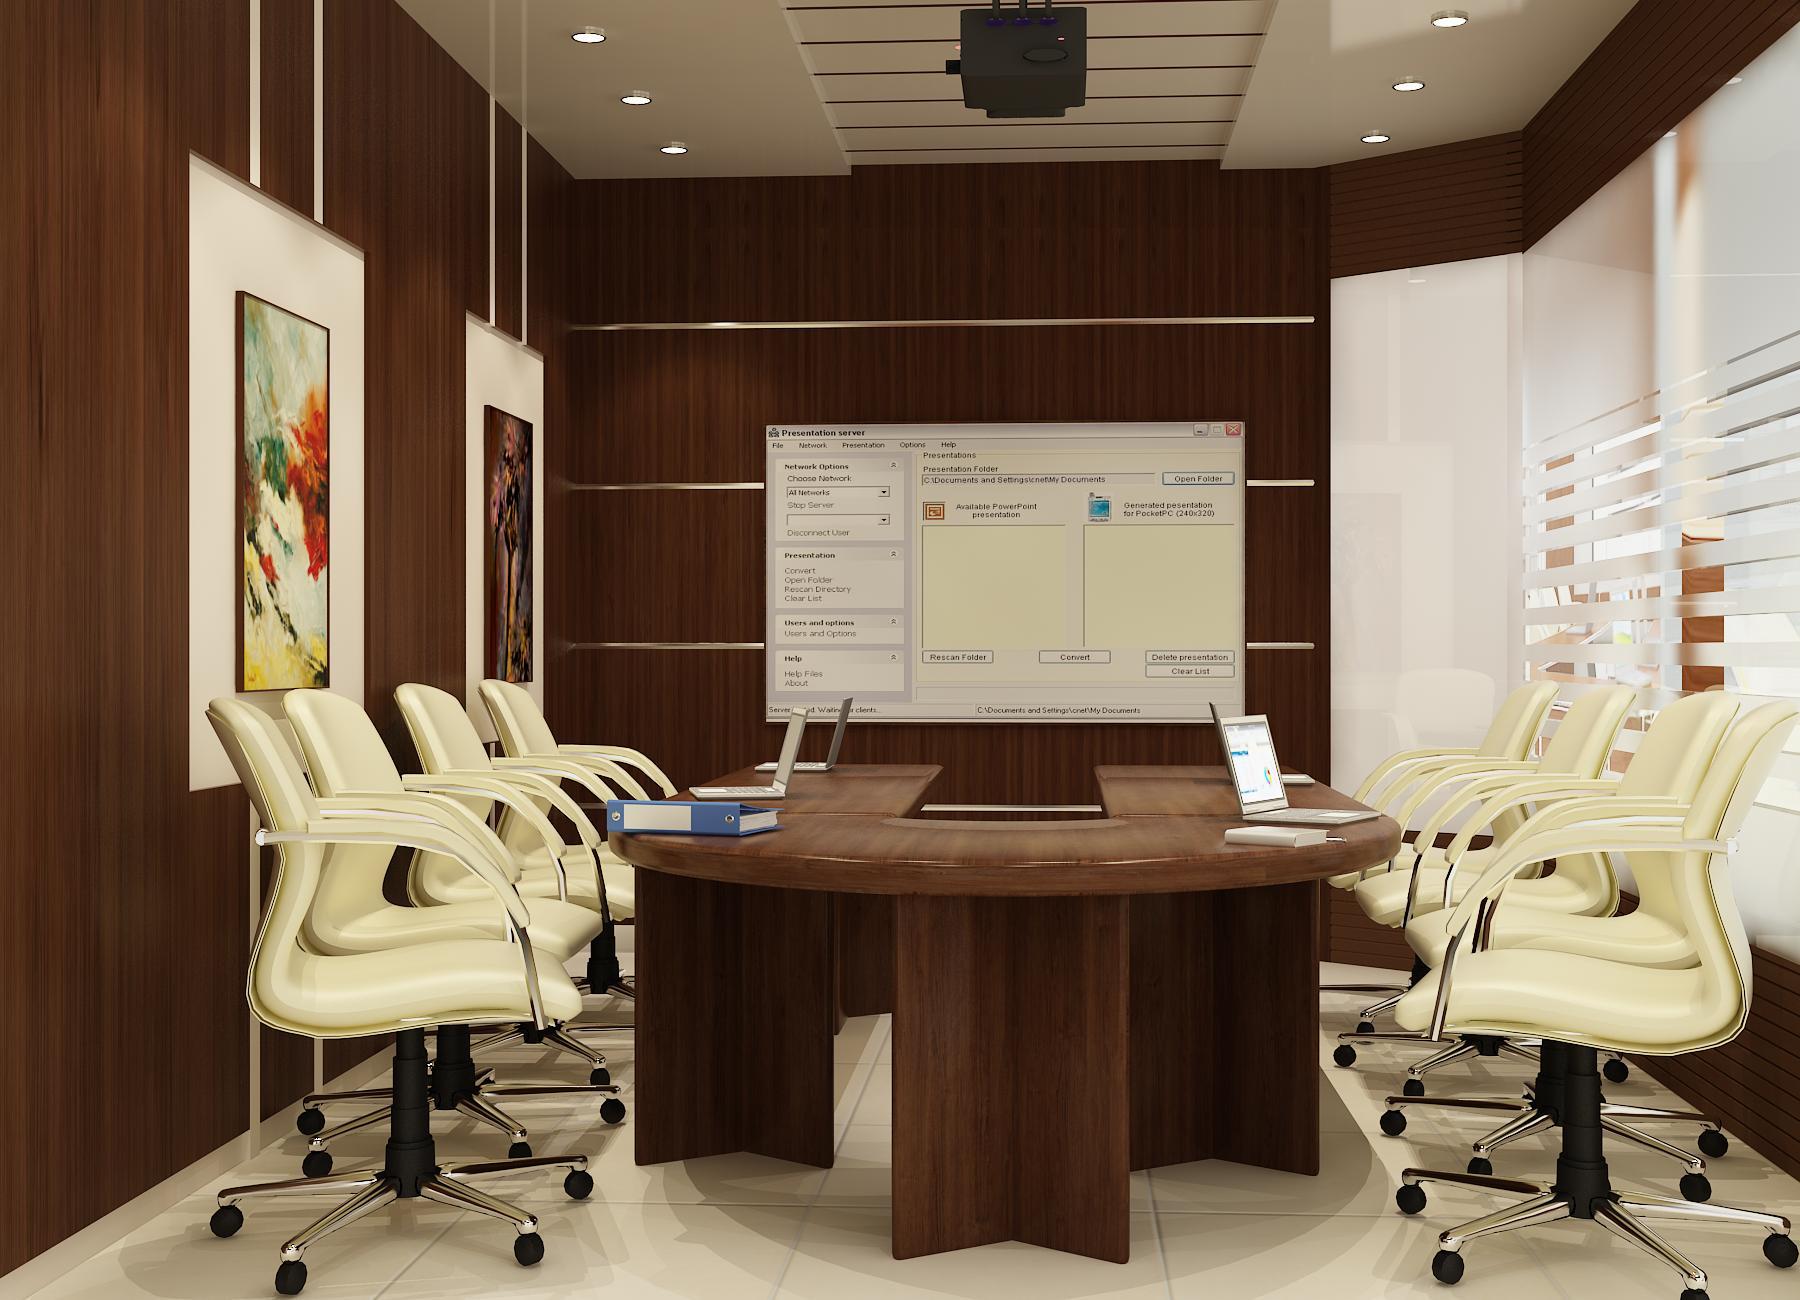 Design of Conference Room